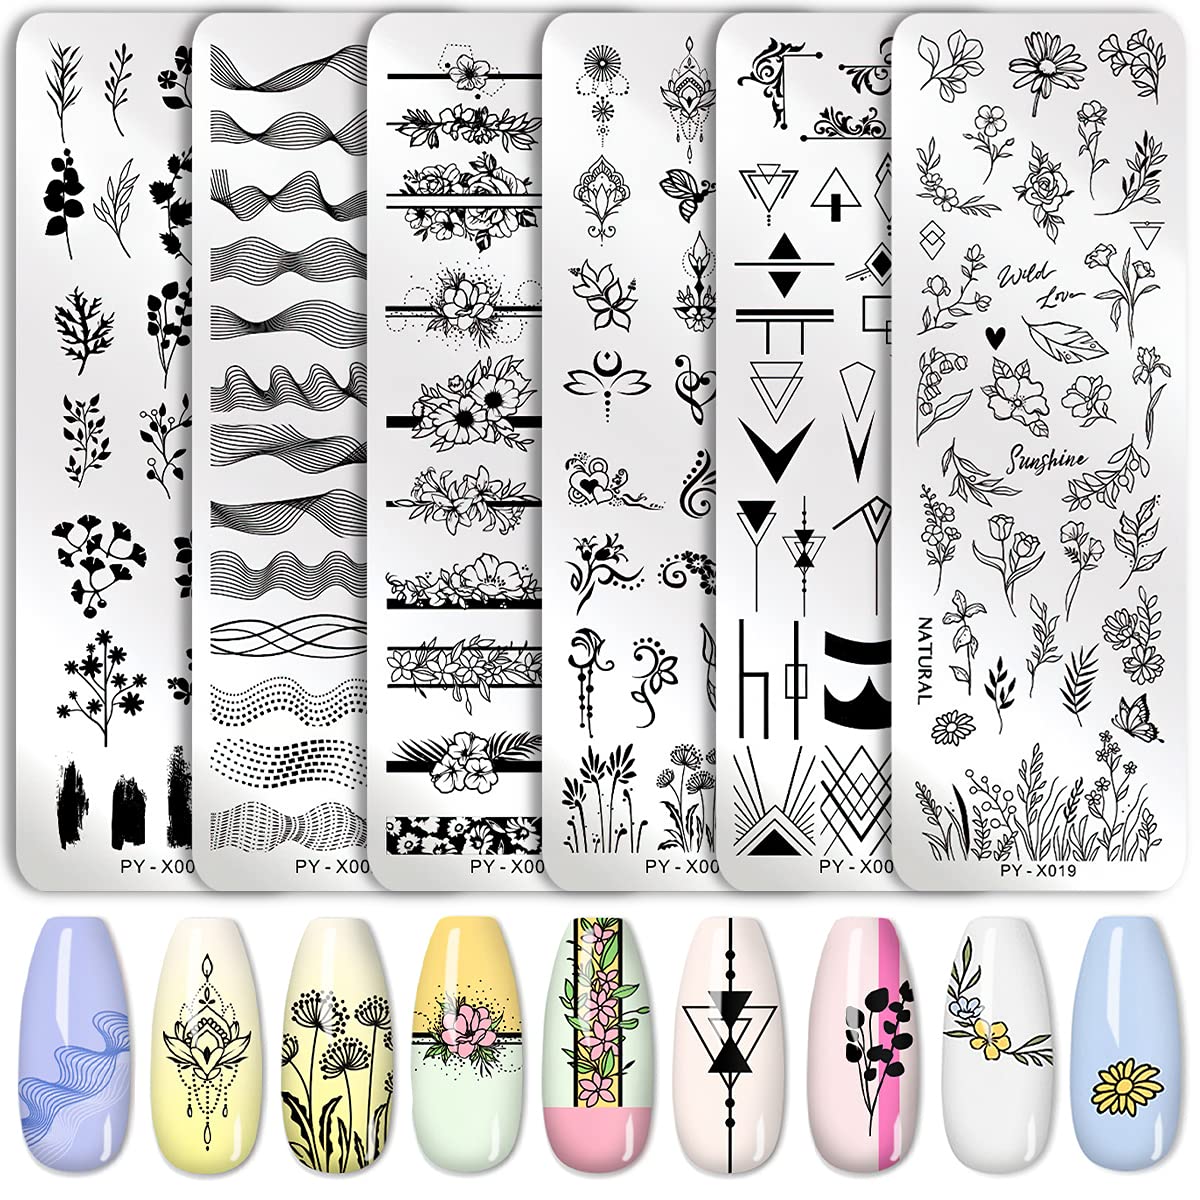 Pict You Sweater Plaid Nail Stamping Plates Lines Animal Geometry Fruit  Theme Template Plate Mold Nail Art Stencil Tools - Nail Templates -  AliExpress